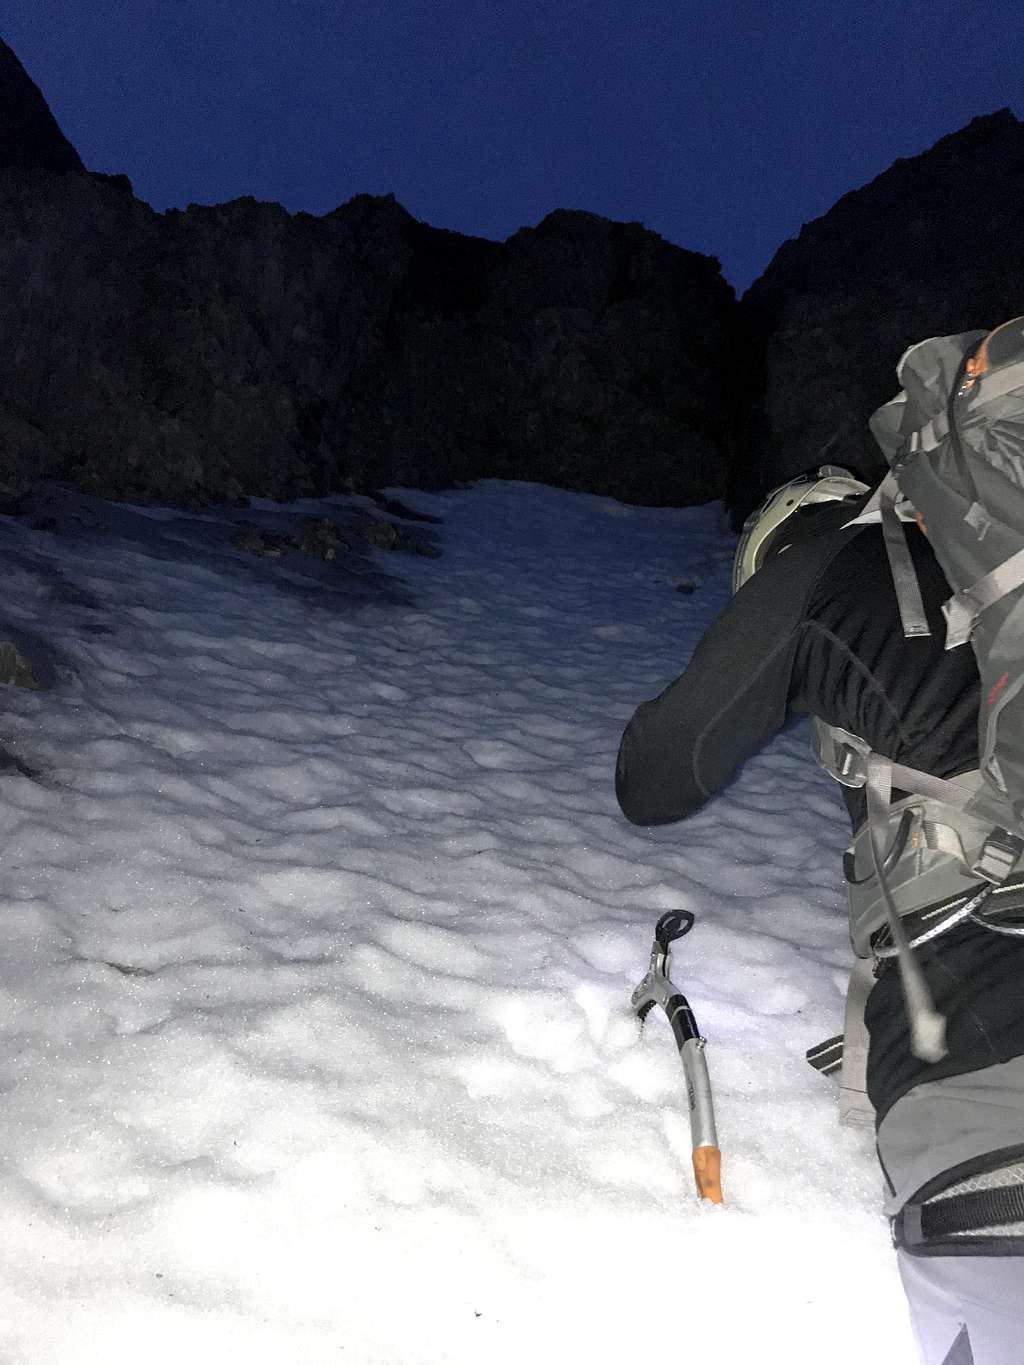 End of the snow climb